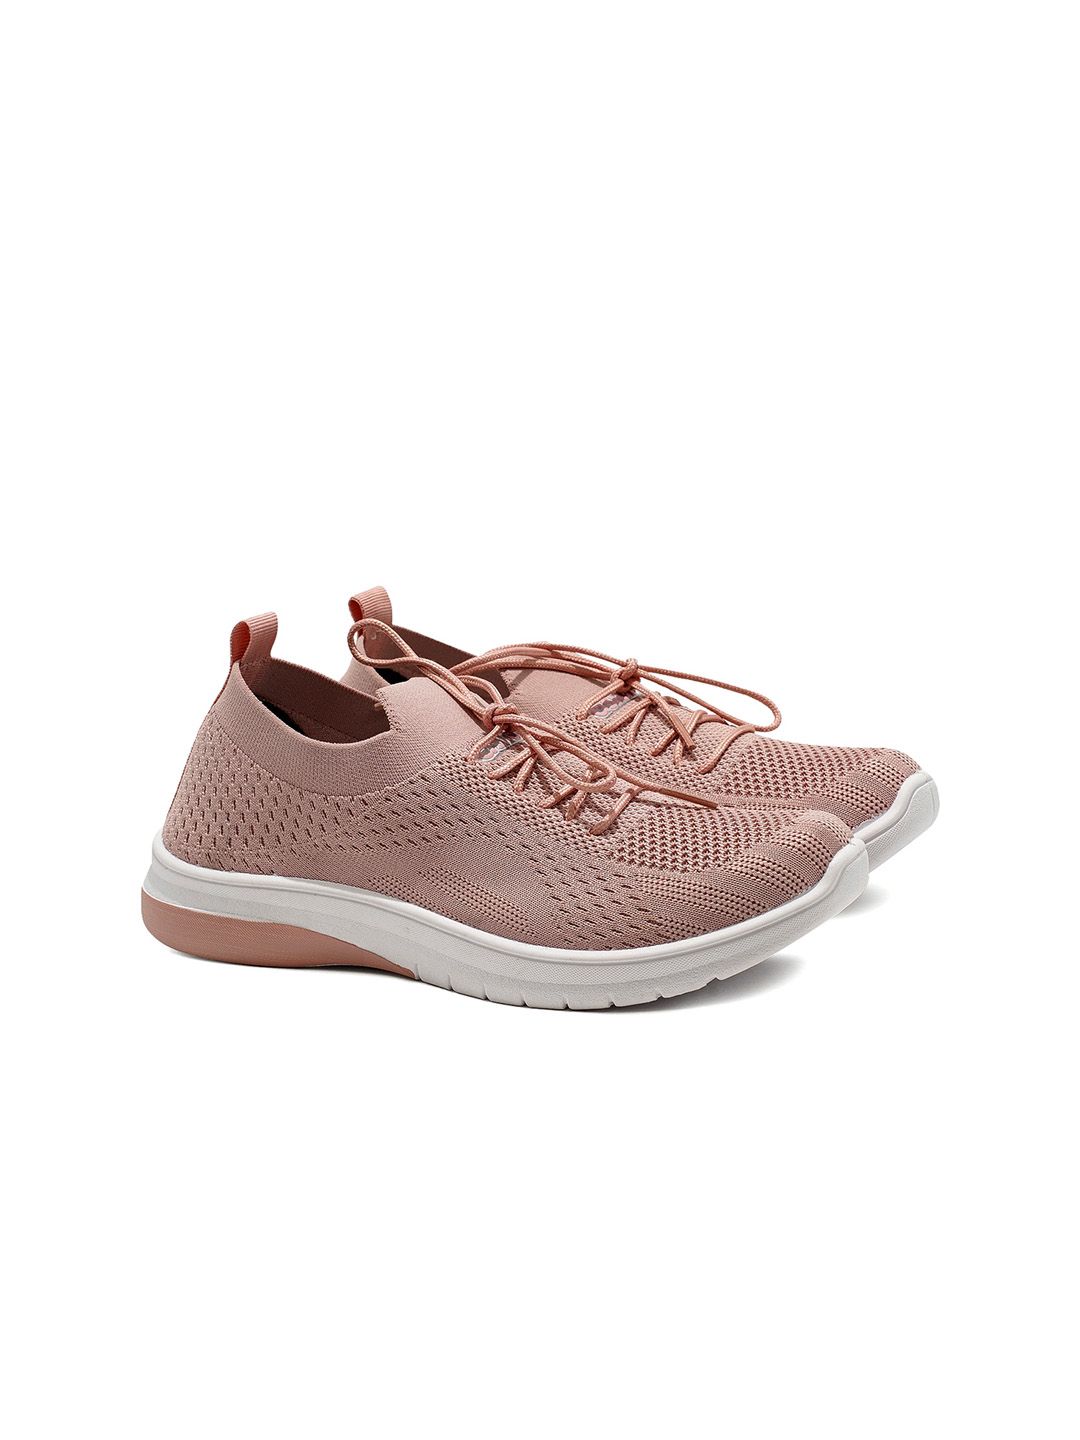 ASIAN Women Peach-Coloured Woven Design Sneakers Price in India